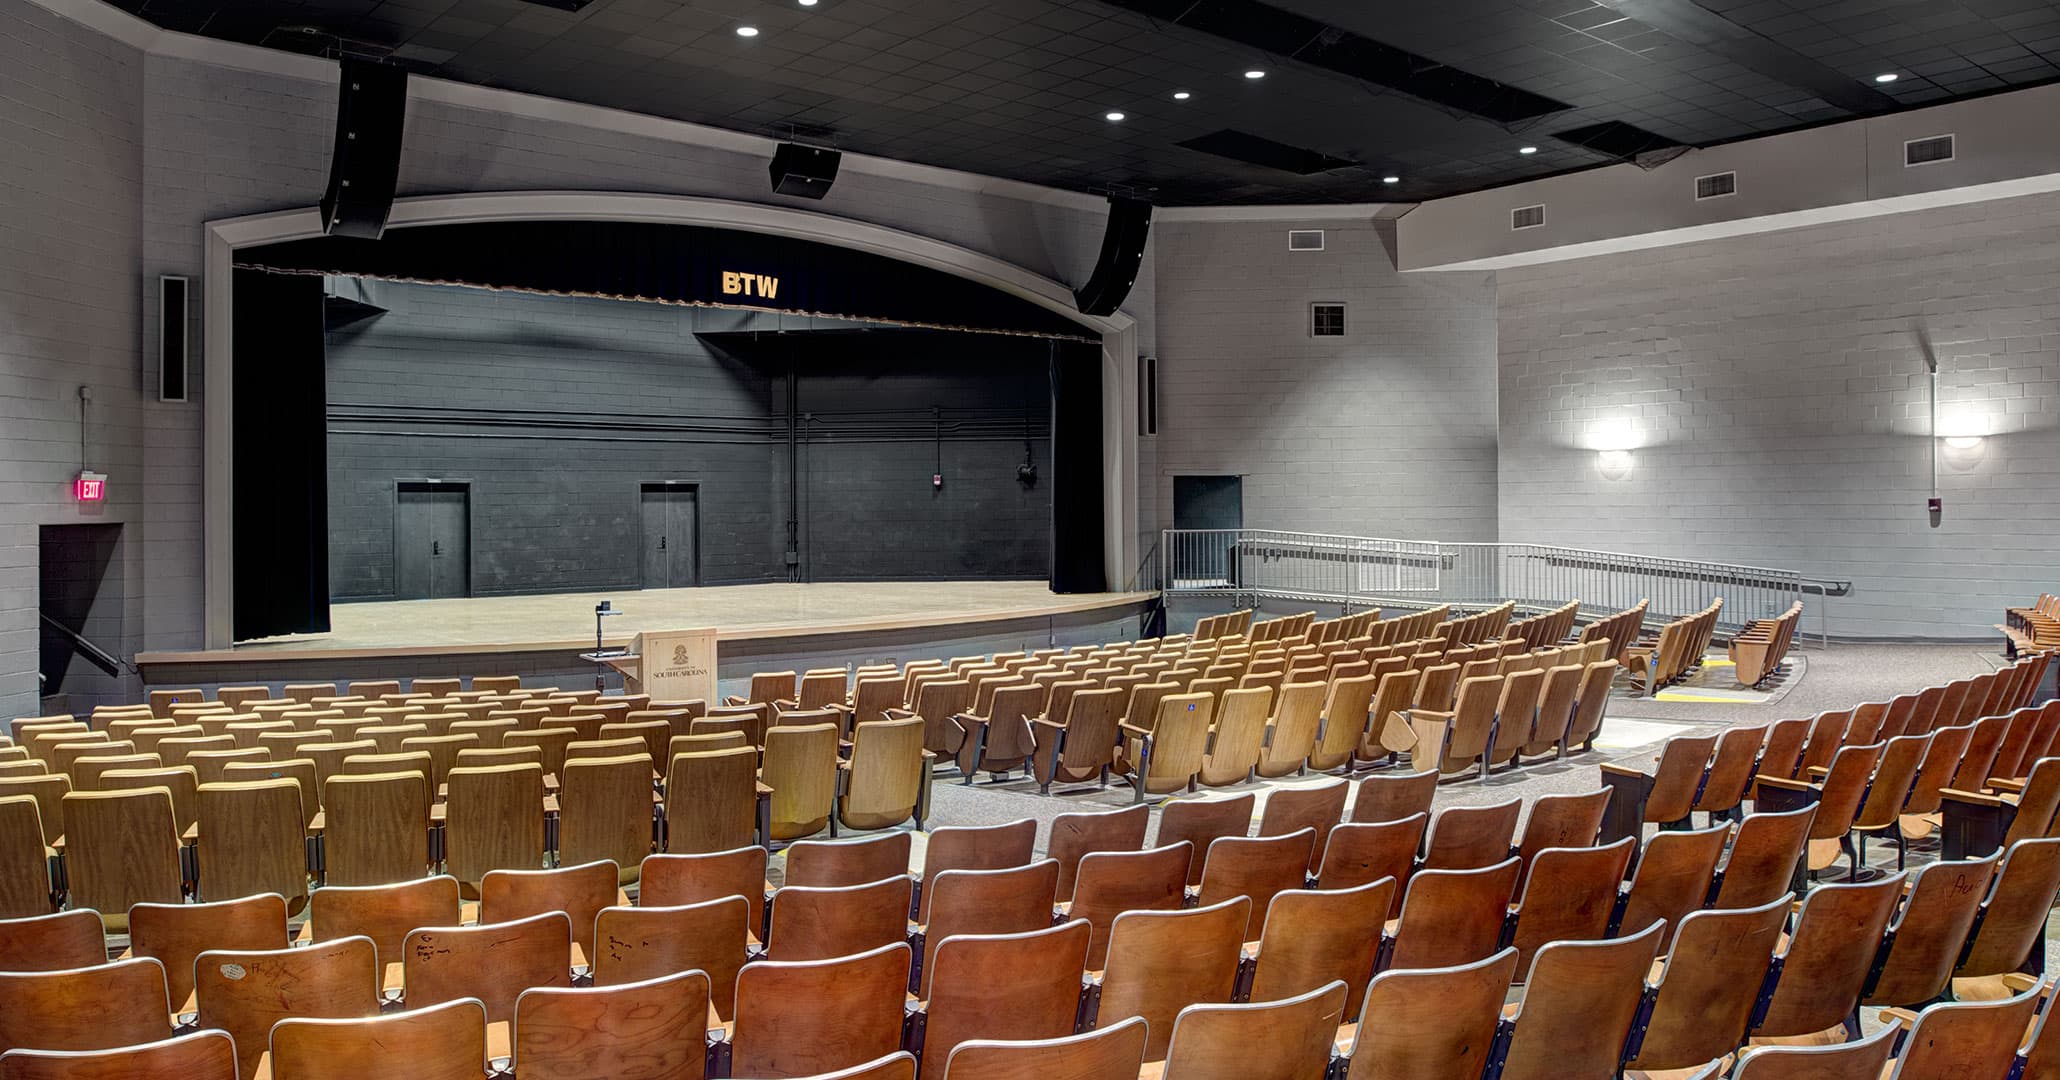 Boudreaux designed the Booker T Washington Auditorium renovation focused on African American history.